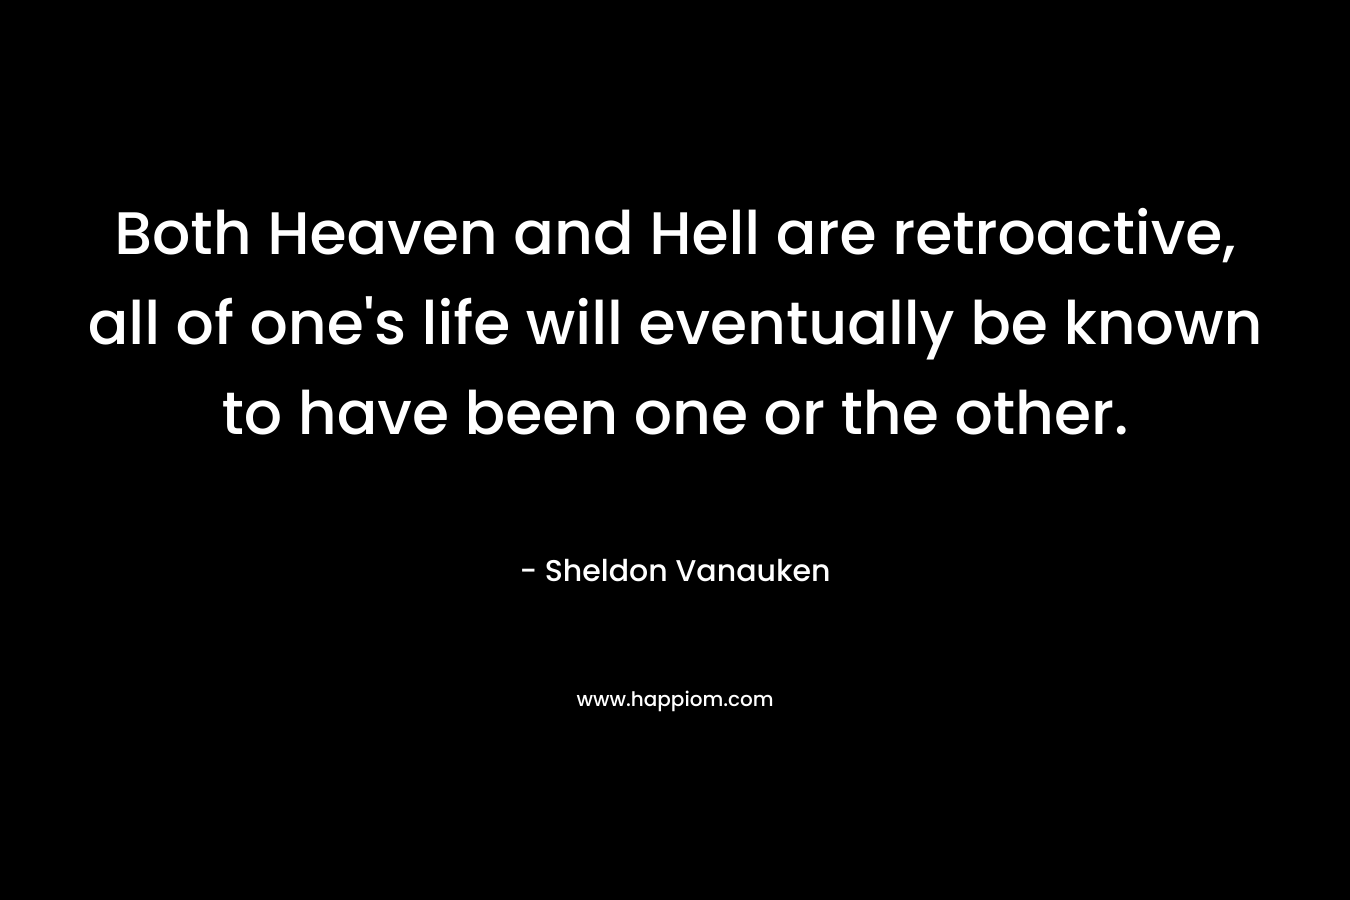 Both Heaven and Hell are retroactive, all of one's life will eventually be known to have been one or the other.